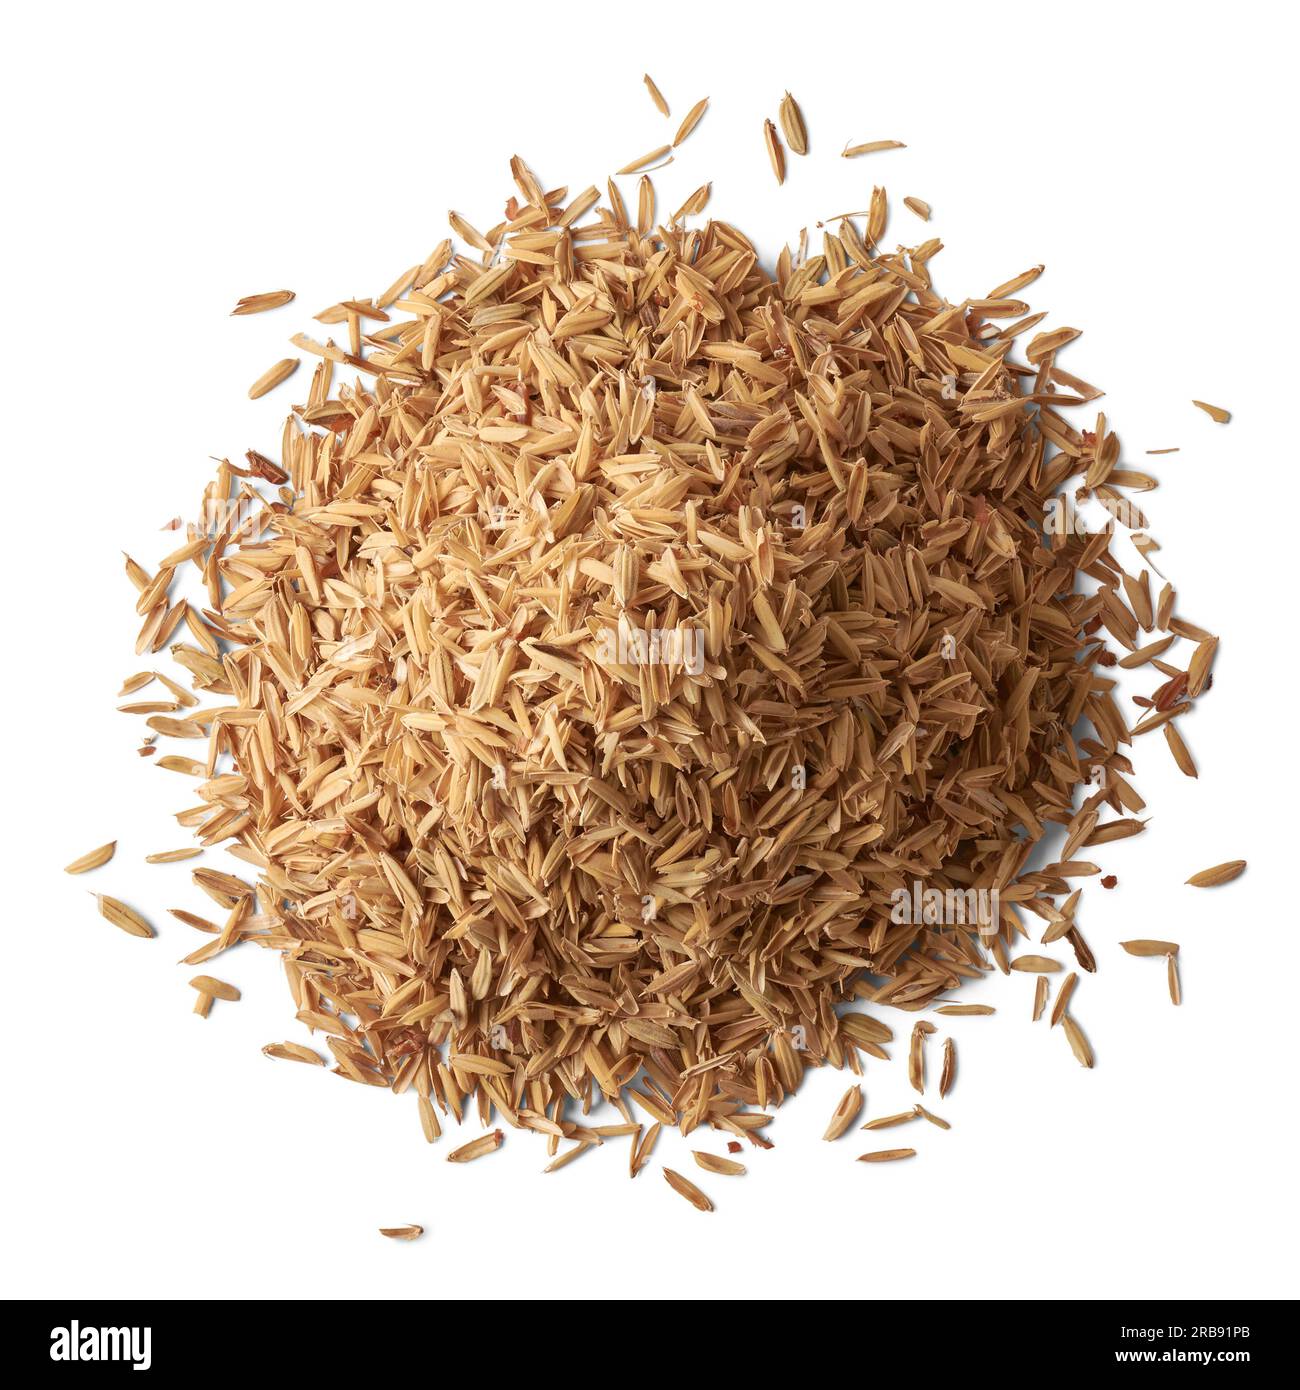 pile of paddy husk or rice husk, aka yellow rice chaff, rice husk or rice hull, outermost layer of the rice grain to use as animal feed, isolated Stock Photo